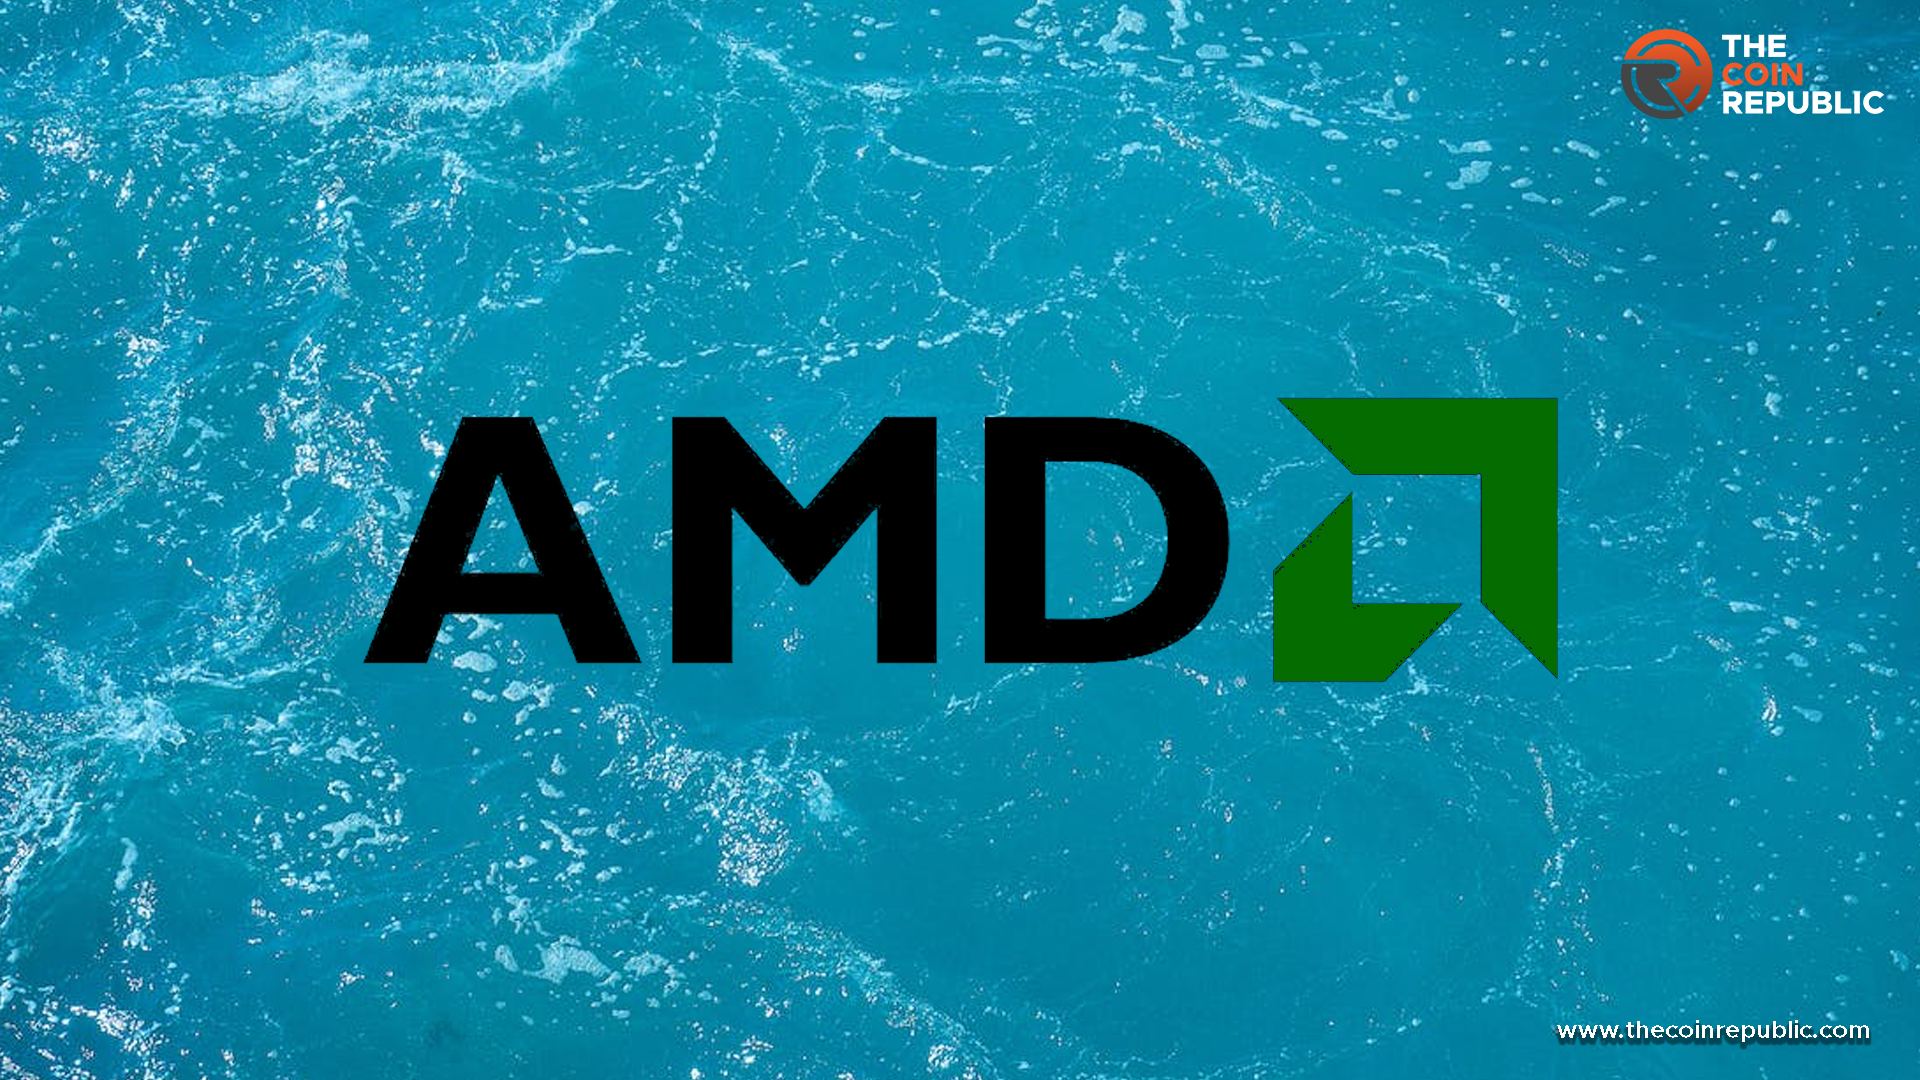 AMD Stock Price Prediction: Will The AMD Stock Price Trend Continue To $100 In 2023?